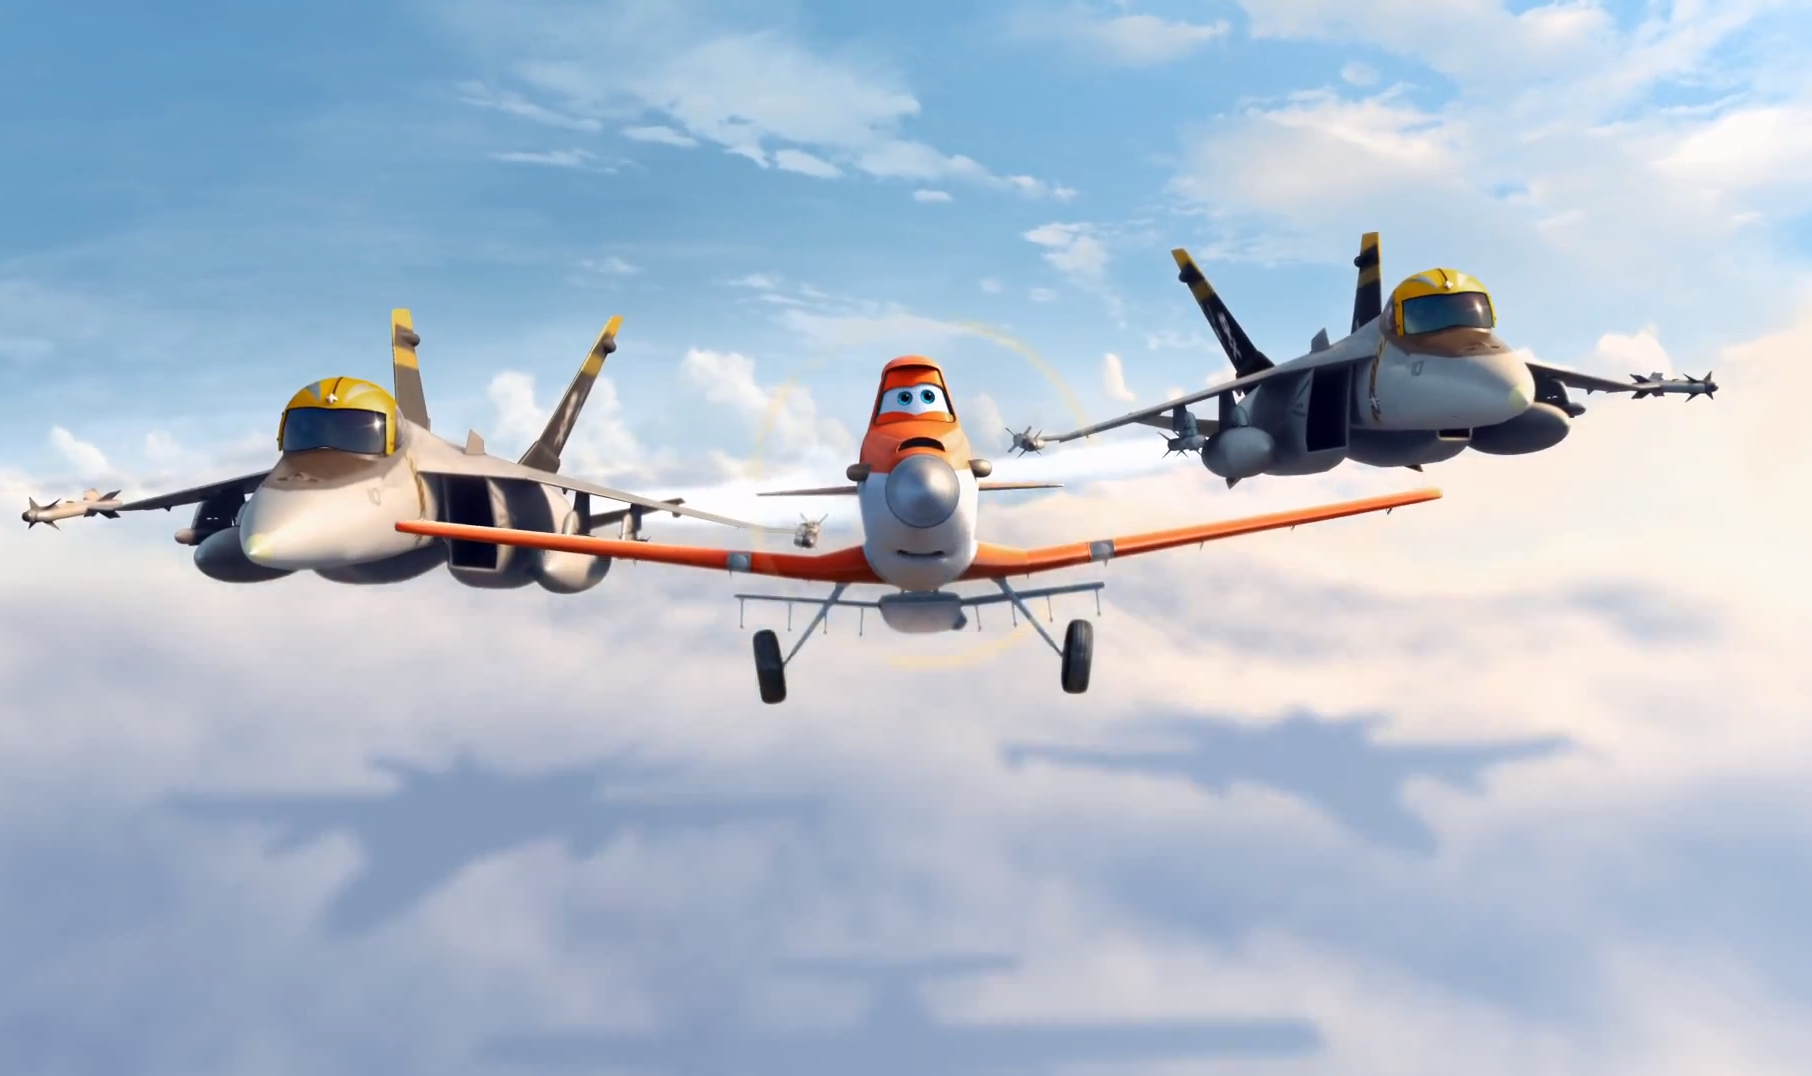 First Trailer from Disney's Planes Released